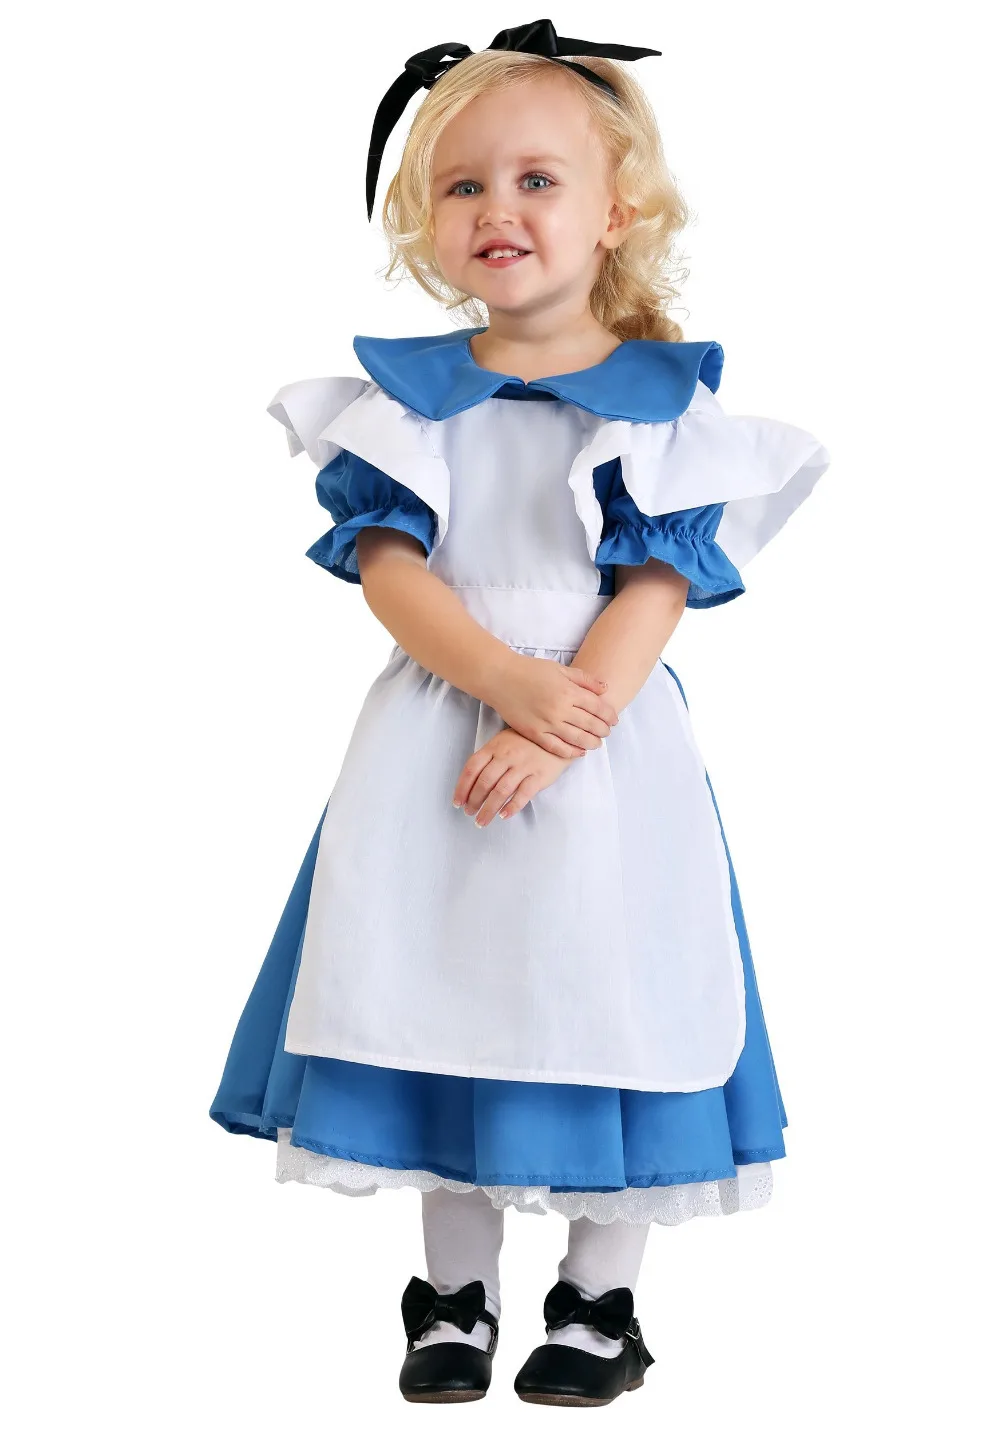 Cosplay&ware Alice In Wonderland Kids Girls Fancy Dress Maid Lolita Cosplay Costume Adult Women Halloween Party Outfits Set -Outlet Maid Outfit Store